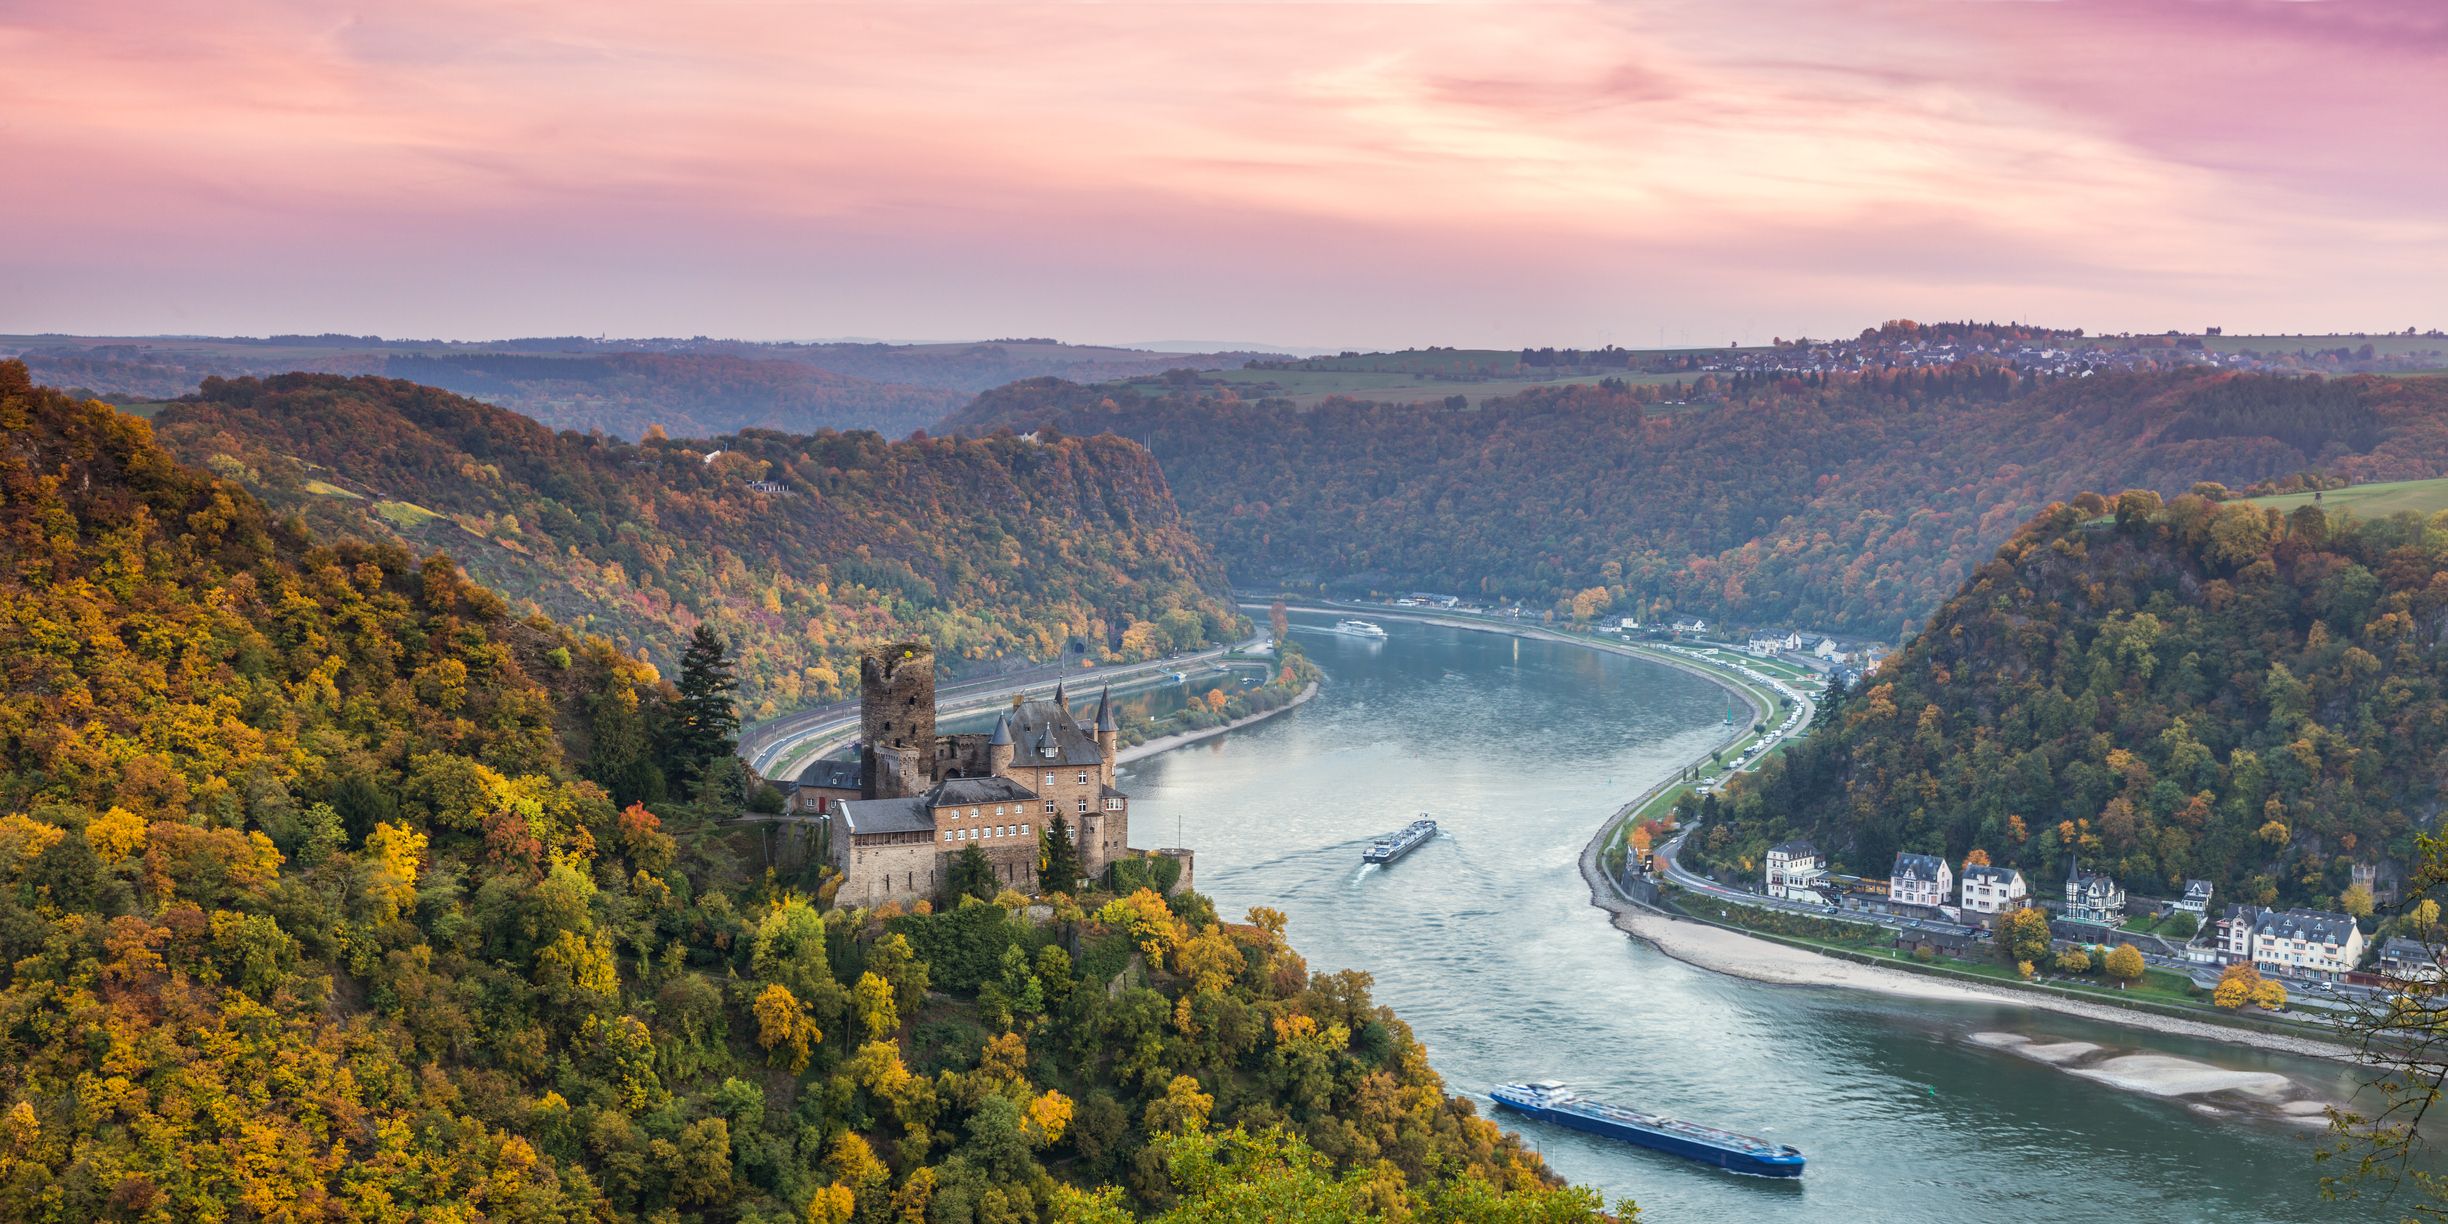 <p>Europe is home to some long, winding rivers, flanked by historical buildings, tranquil <a href="https://www.goodhousekeeping.com/uk/lifestyle/travel/g29635900/french-vineyard/">vineyards</a> and enticing restaurants. </p><p>Many of the loveliest rivers in Europe flow through elegant cities, which once relied on these waterways for the trades that allowed them to flourish. </p><p>There's the ever-romantic Seine, which meanders through <a href="https://www.goodhousekeeping.com/uk/lifestyle/travel/g28406616/hotels-in-paris-france/">Paris</a>, where you'll spot the iconic Eiffel Tower and Notre Dame cathedral standing proudly on its banks, and the <a href="https://www.goodhousekeepingholidays.com/tours/danube-cruise-julie-madly-deeply">Danube</a>, which traverses four magnificent capitals, Vienna, Bratislava, Budapest, and Belgrade.</p><p>Of course, there's plenty of rural beauty to appreciate along the banks of Europe's rivers too, like the sun-kissed hills that sweep up the <a href="https://www.goodhousekeepingholidays.com/tours/douro-river-wine-cruise">Douro Valley</a> and the fragrant lavender fields surrounding the <a href="https://www.goodhousekeepingholidays.com/tours/rhone-river-cruise-lyon-james-martin">Rhône</a>.</p><p>If you want to experience these wonderful rivers in all their glory, you might want to consider a <a href="https://www.goodhousekeepingholidays.com/collection/river-cruise">river cruise</a>. Just like a <a href="https://www.goodhousekeeping.com/uk/lifestyle/travel/g27645232/rail-holidays/">train journey</a>, travelling by river is a fantastically peaceful way of seeing an array of exciting landmarks in one trip. And as you sail along the course of one of the prettiest rivers in Europe you'll be able to soak in the glorious scenery as you go. </p><p>It's a fantastic way to see the continent, and there are beautiful options available, from the mighty Danube to the peaceful <a href="https://www.goodhousekeepingholidays.com/tours/douro-river-wine-cruise">Douro</a>. Be inspired by our round-up of the most beautiful rivers in Europe...</p>